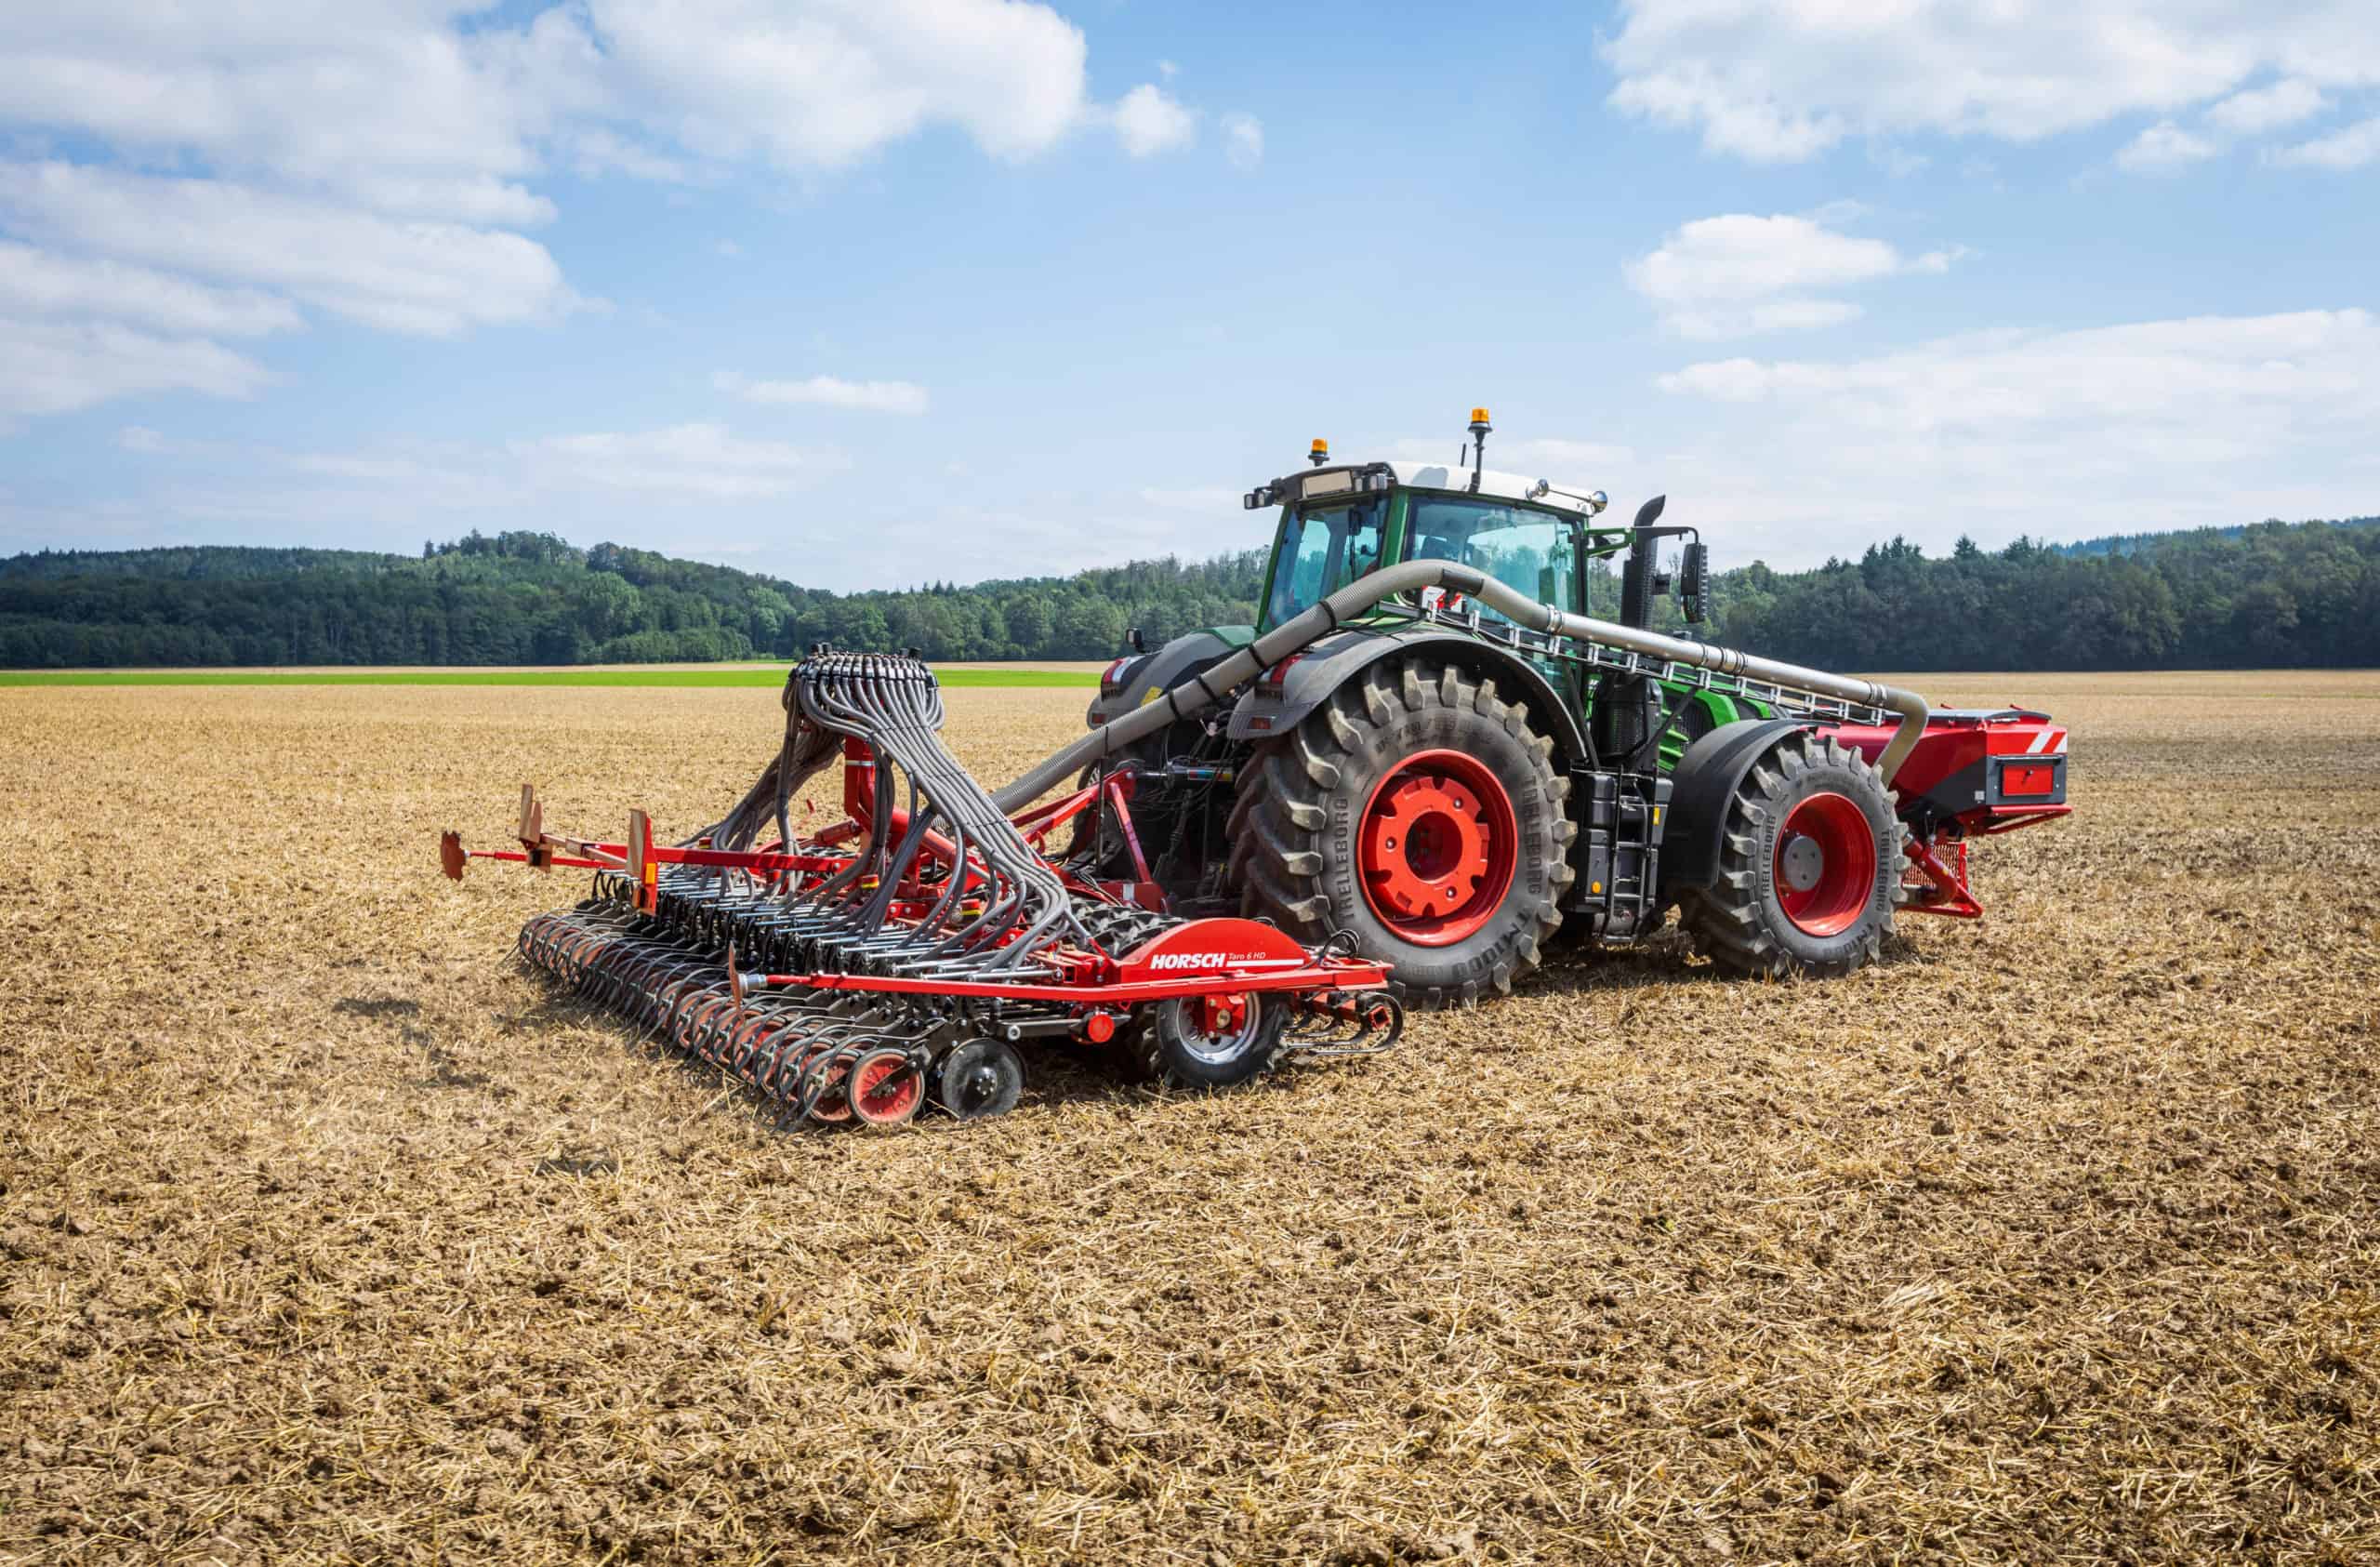 New HORSCH Taro drill family is highly manoeuvrable and efficient